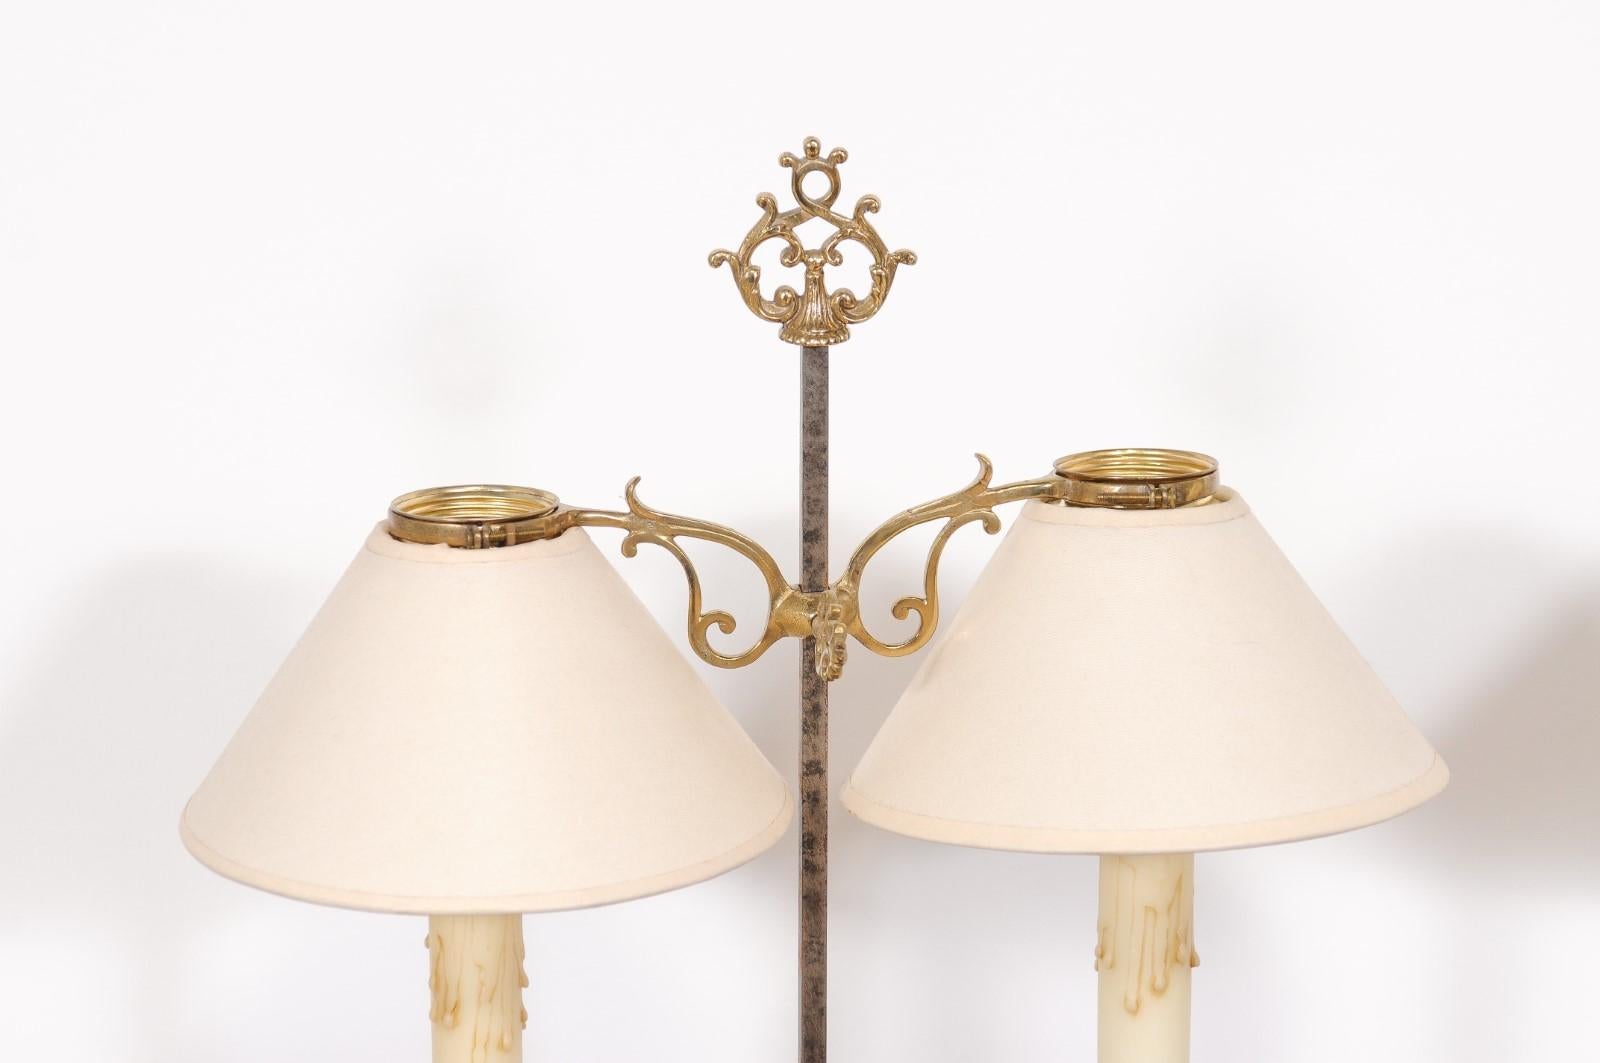 French 19th Century Brass Candlestick Lamps with Scrolling Arms, a Wired Pair For Sale 5